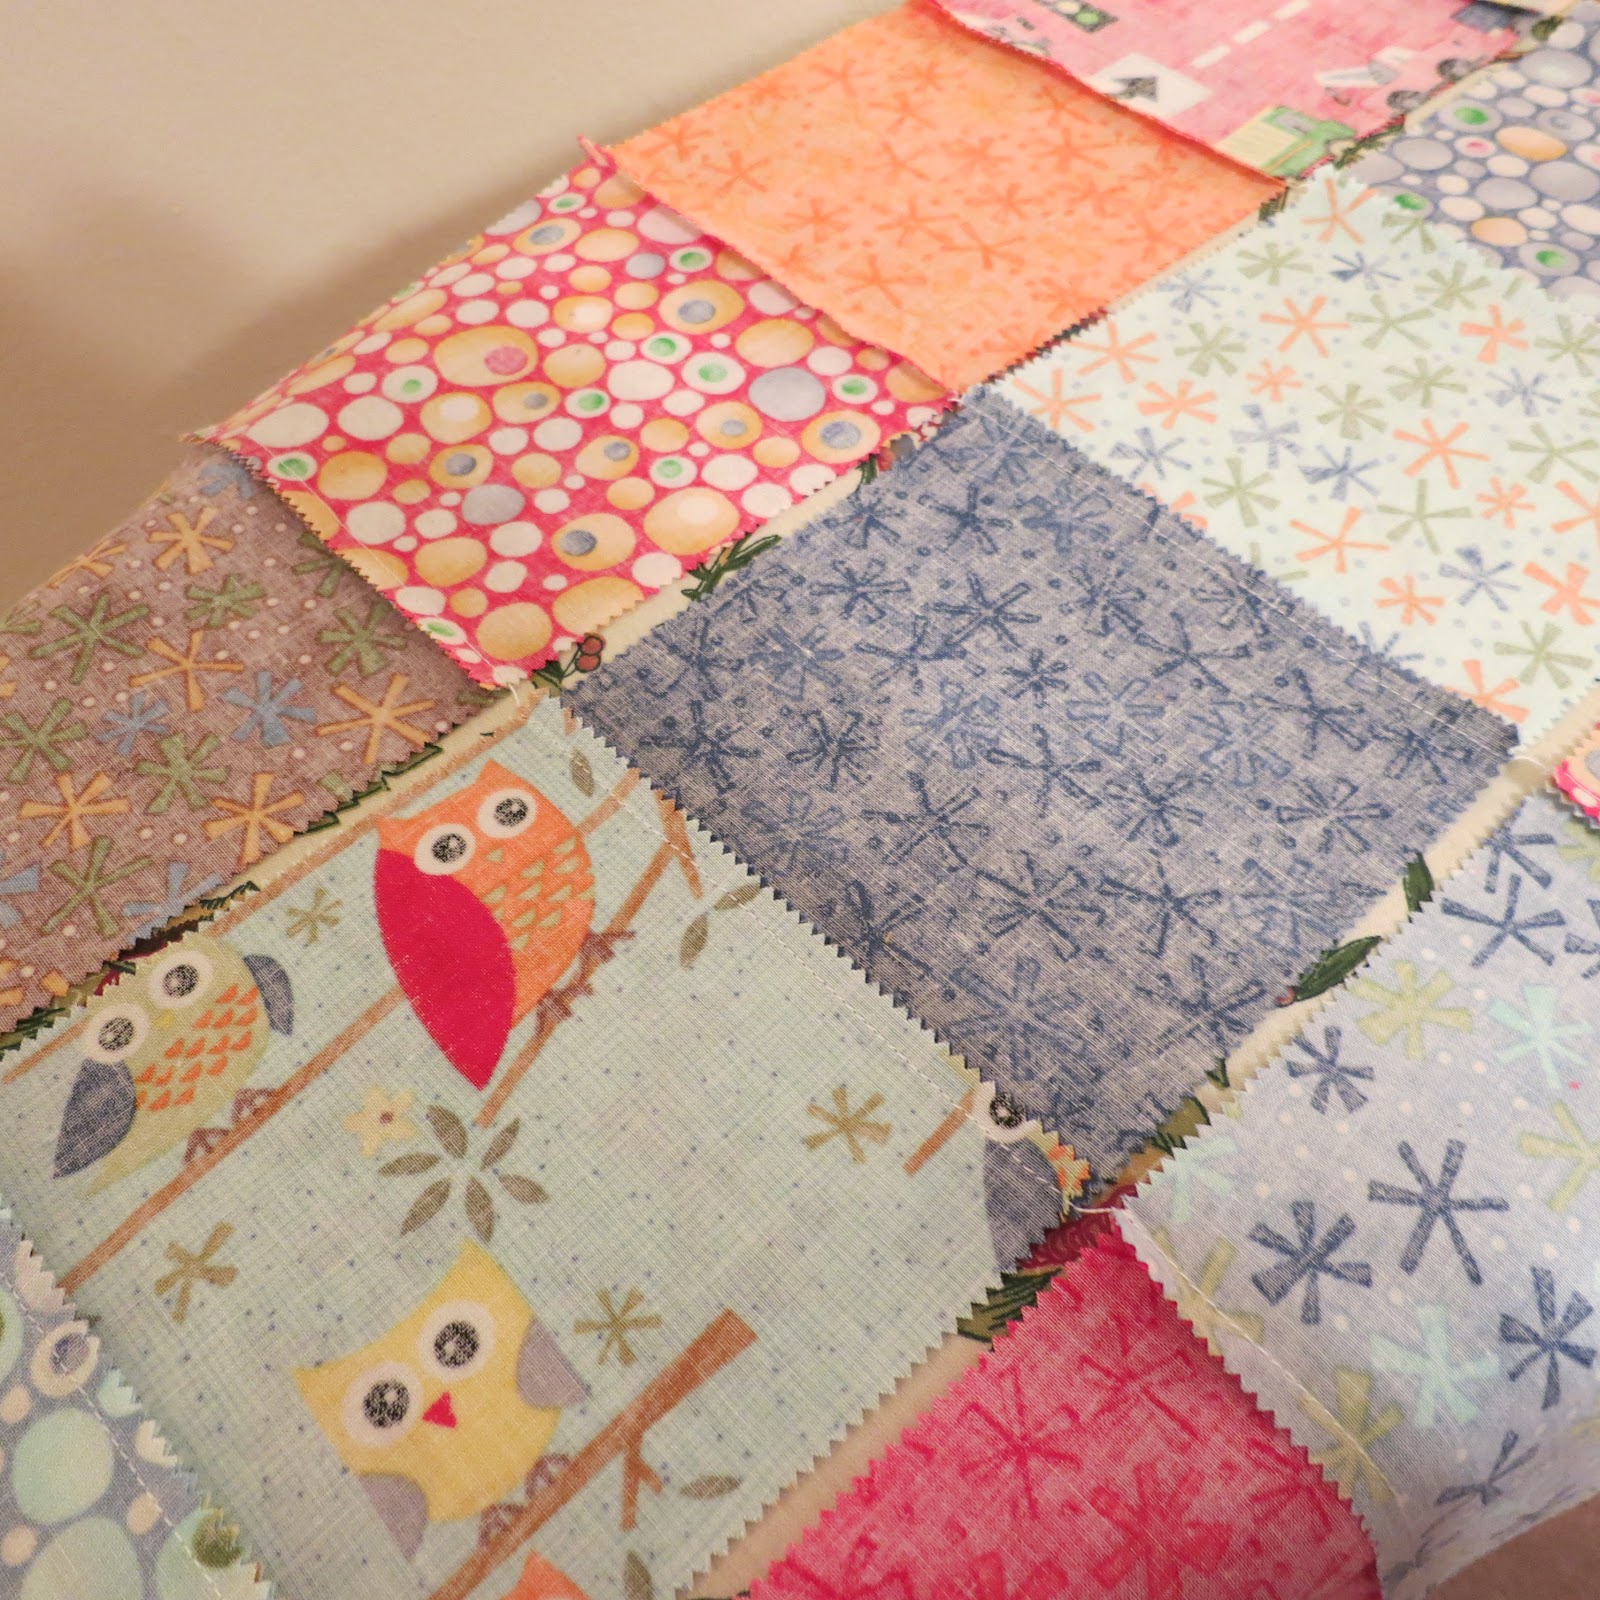 Toddler Quilt - Baby Quilt - Kawaii Owls Quilt Panel by Riley